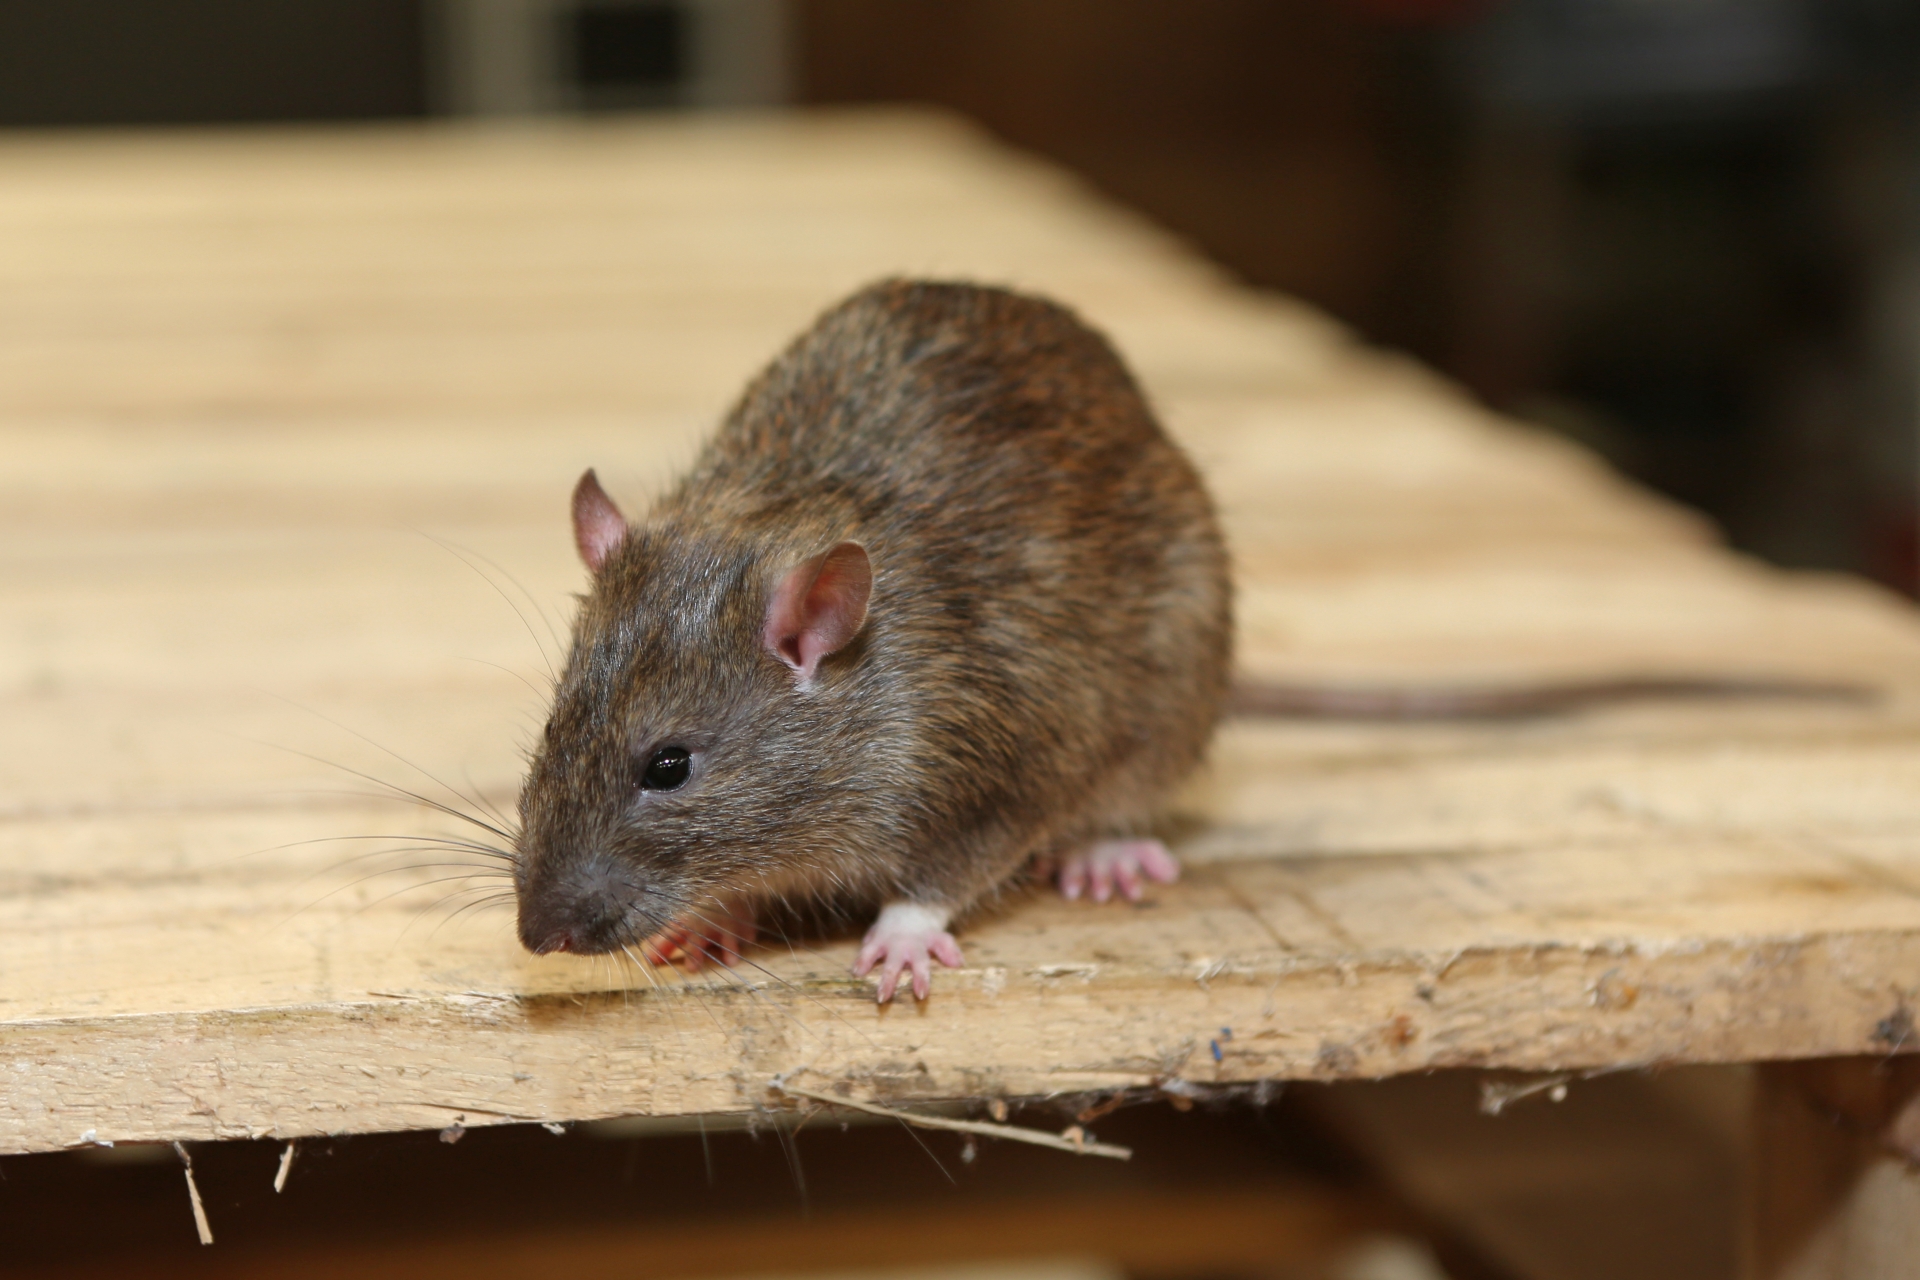 Rat Control, Pest Control in South Woodford, E18. Call Now 020 8166 9746